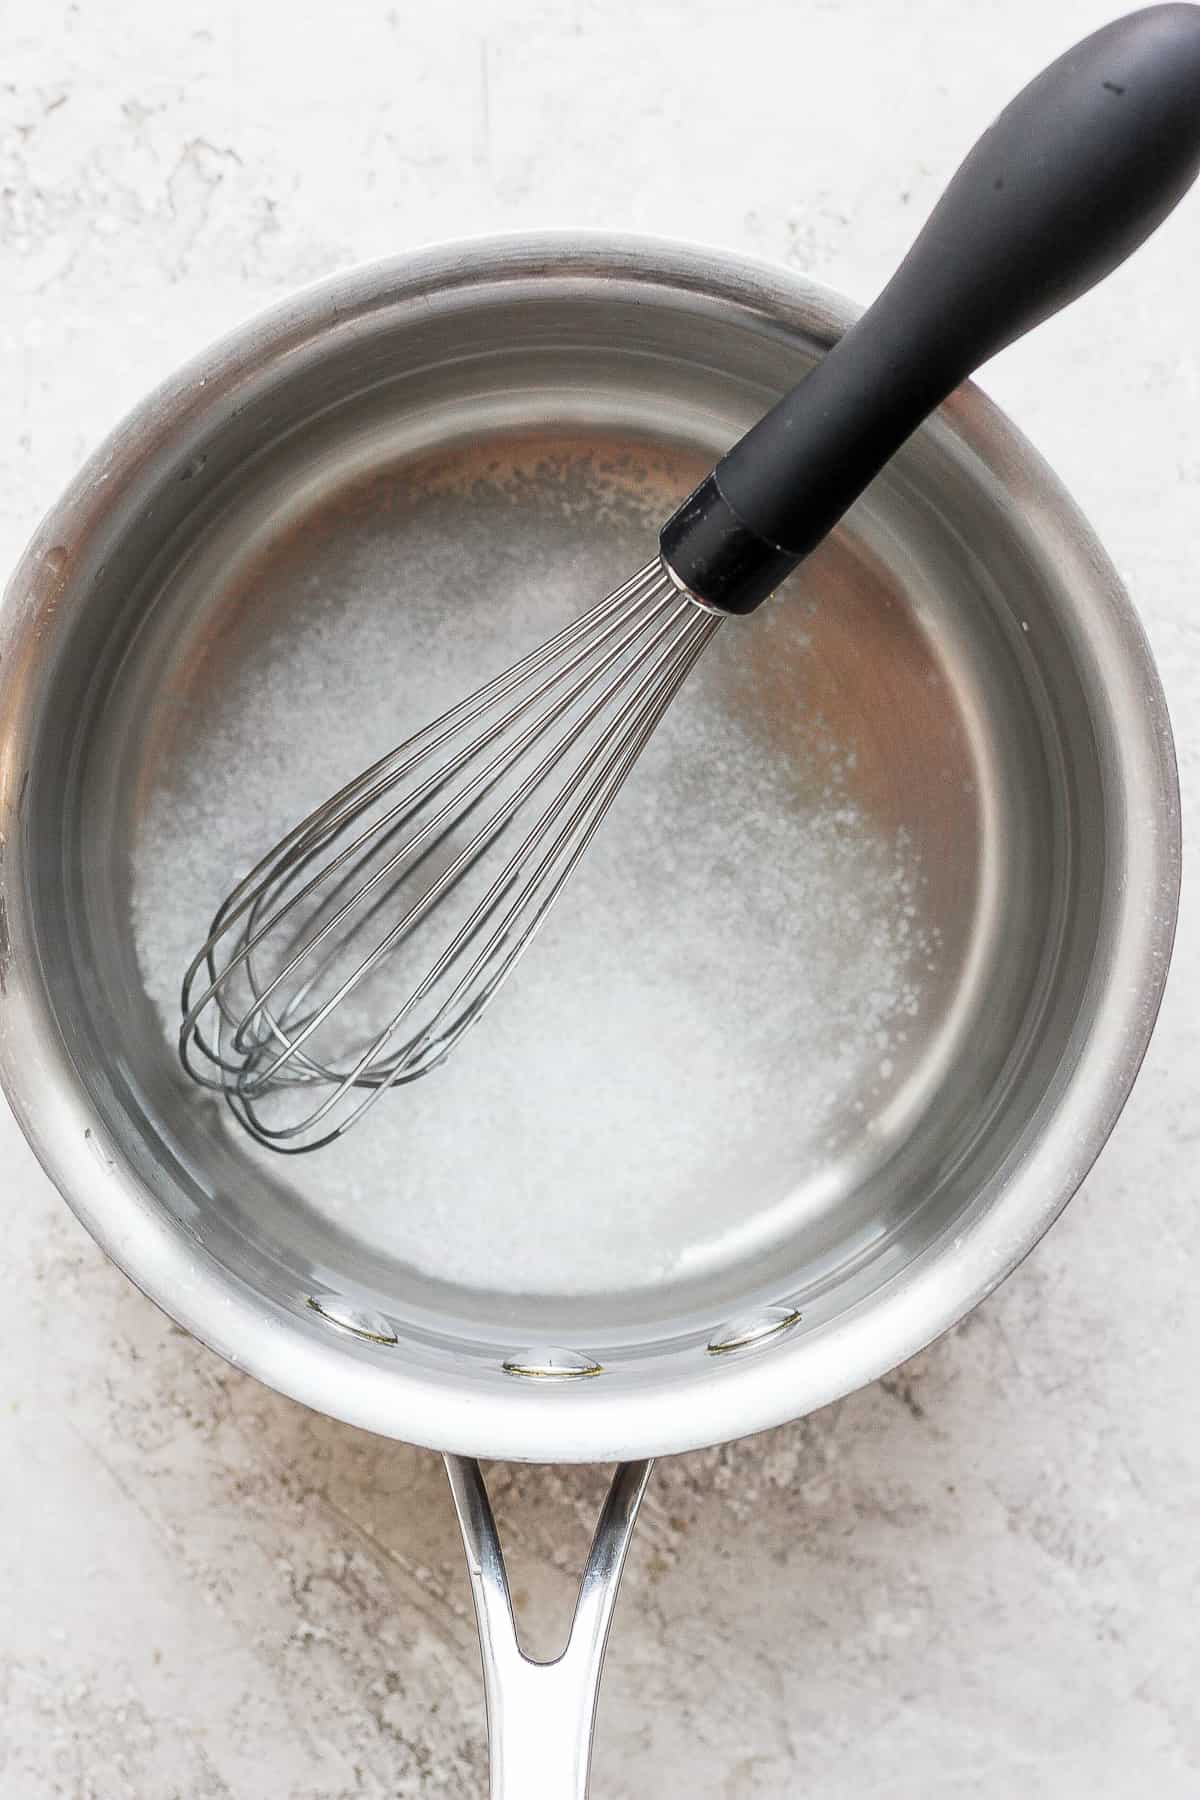 Salt in a pot with a whisk.